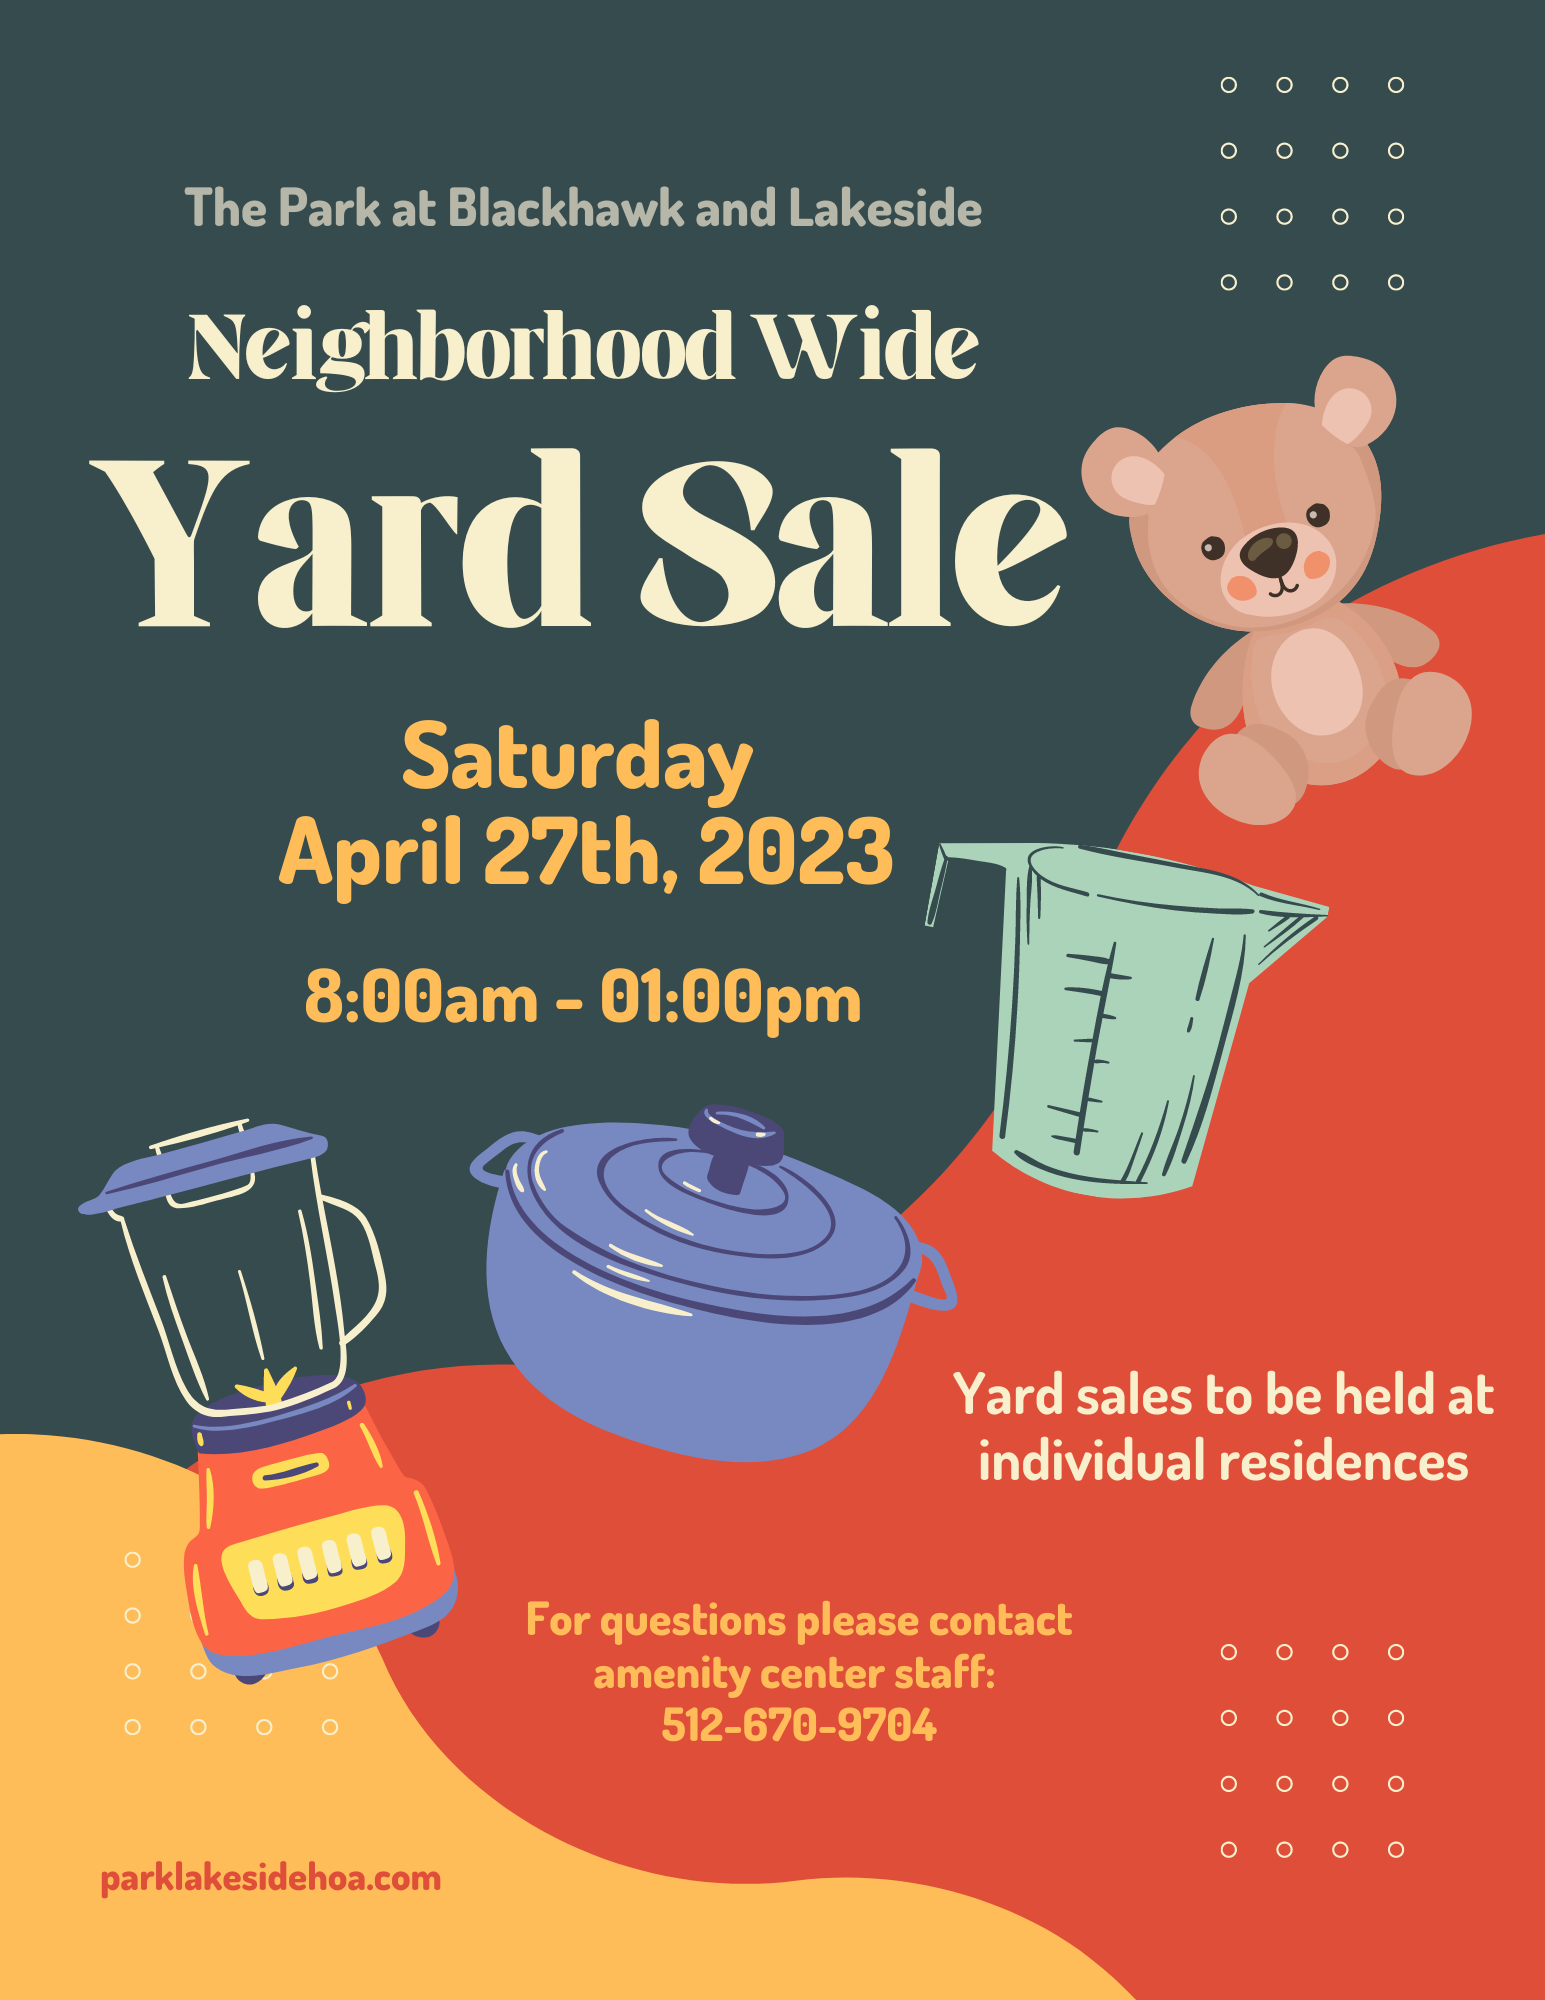 Flyer for a neighborhood-wide yard sale event at The Park at Blackhawk and Lakeside, scheduled for Saturday, April 27th, 2023, from 8:00 am to 1:00 pm. The flyer has a playful design with images of household items like a teddy bear, a blender, a pot, and a measuring cup. The event details are in white and yellow fonts on a dark teal background. Contact information for the amenity center staff is provided for further questions.